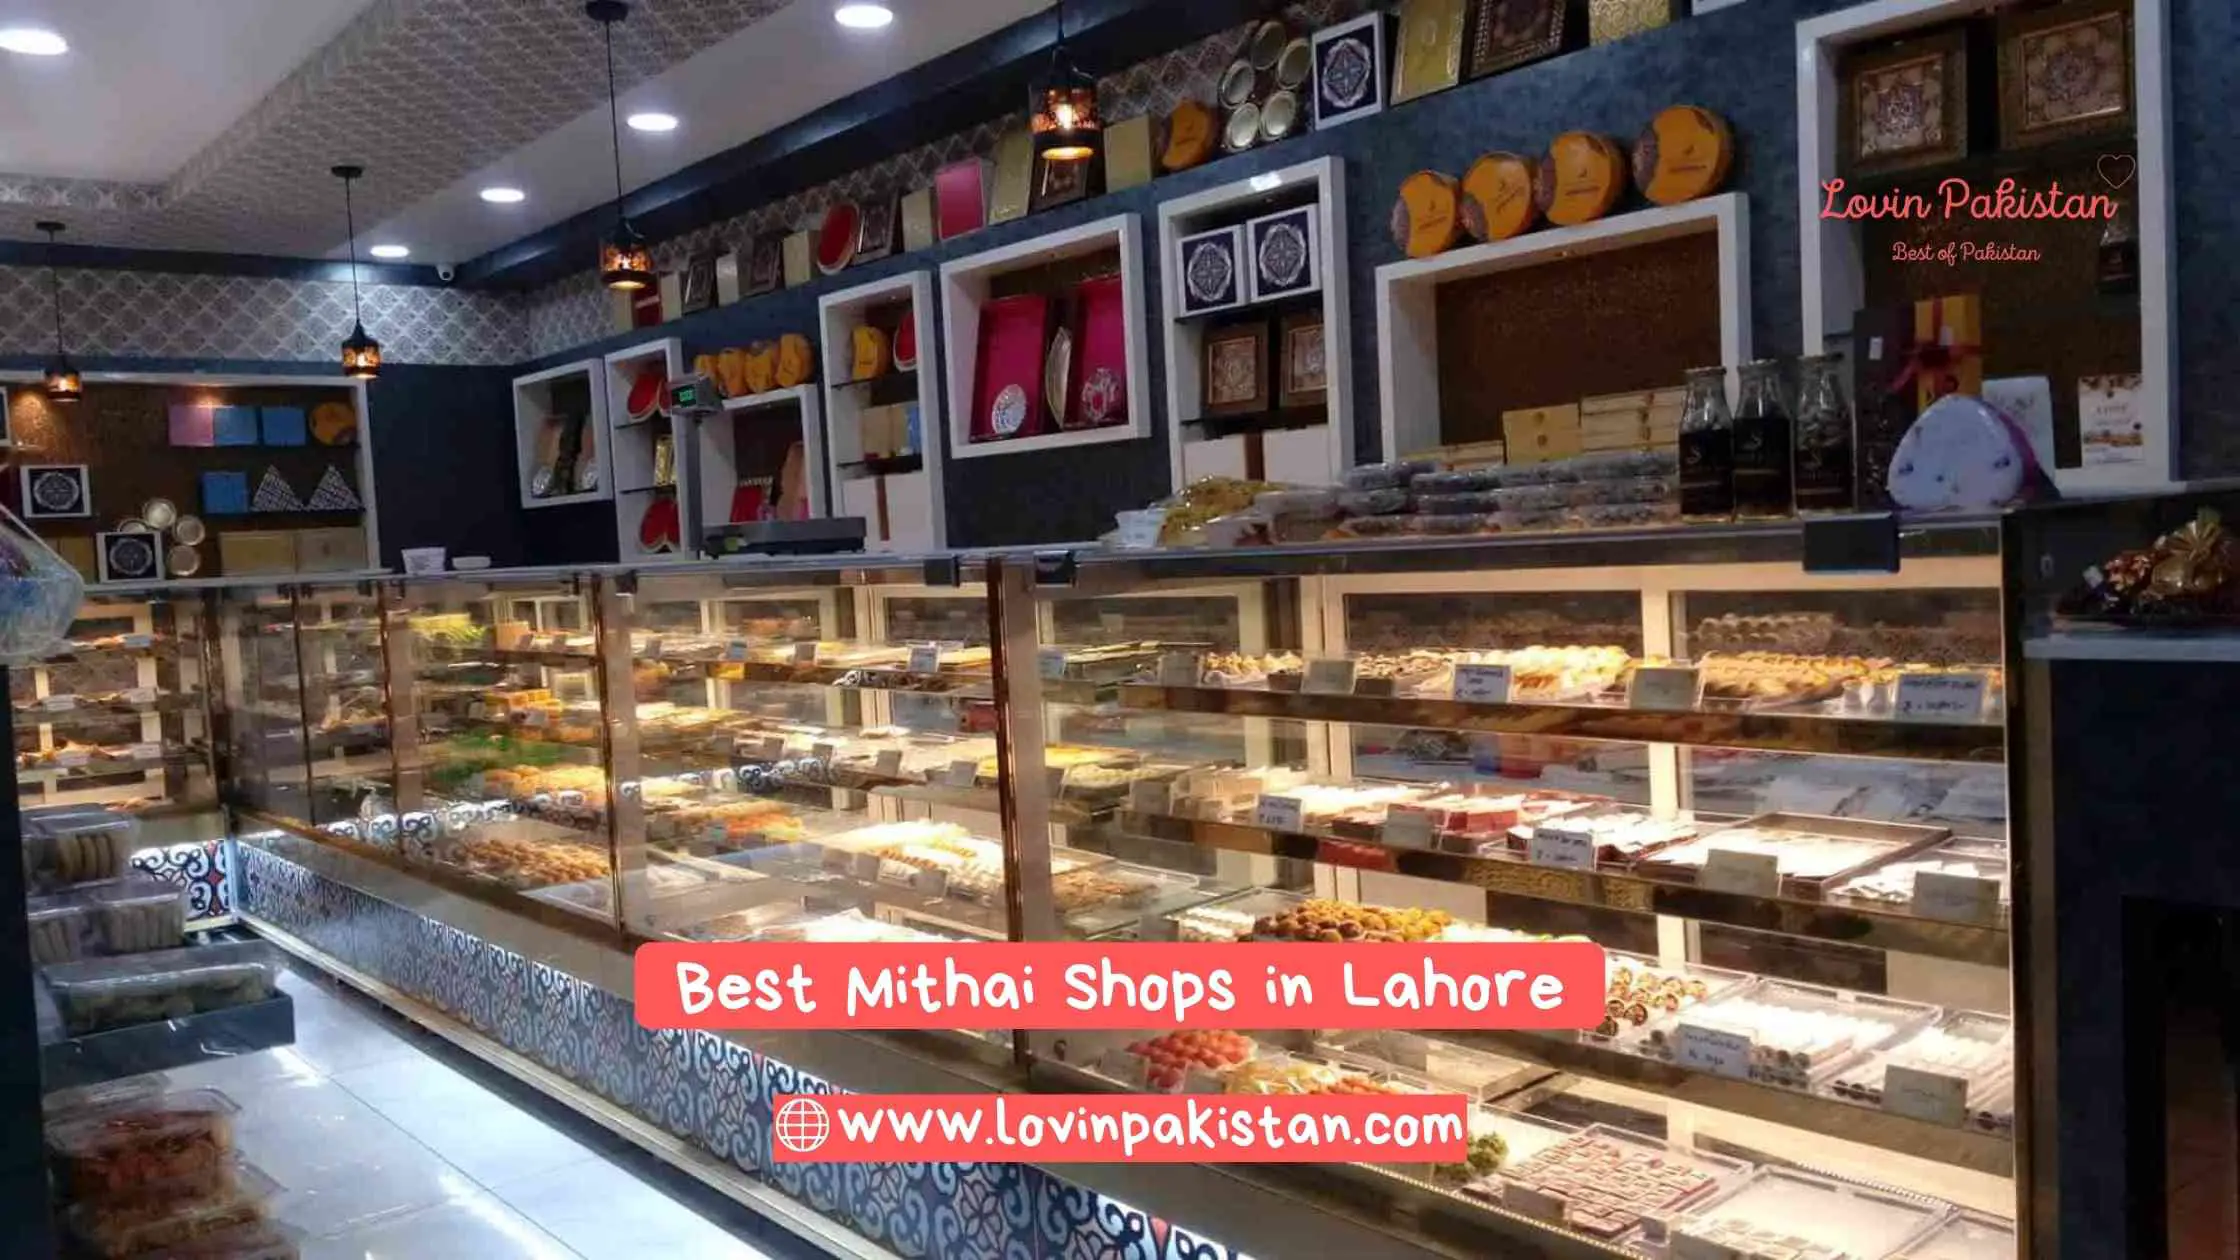 Best Mithai Shops in Lahore